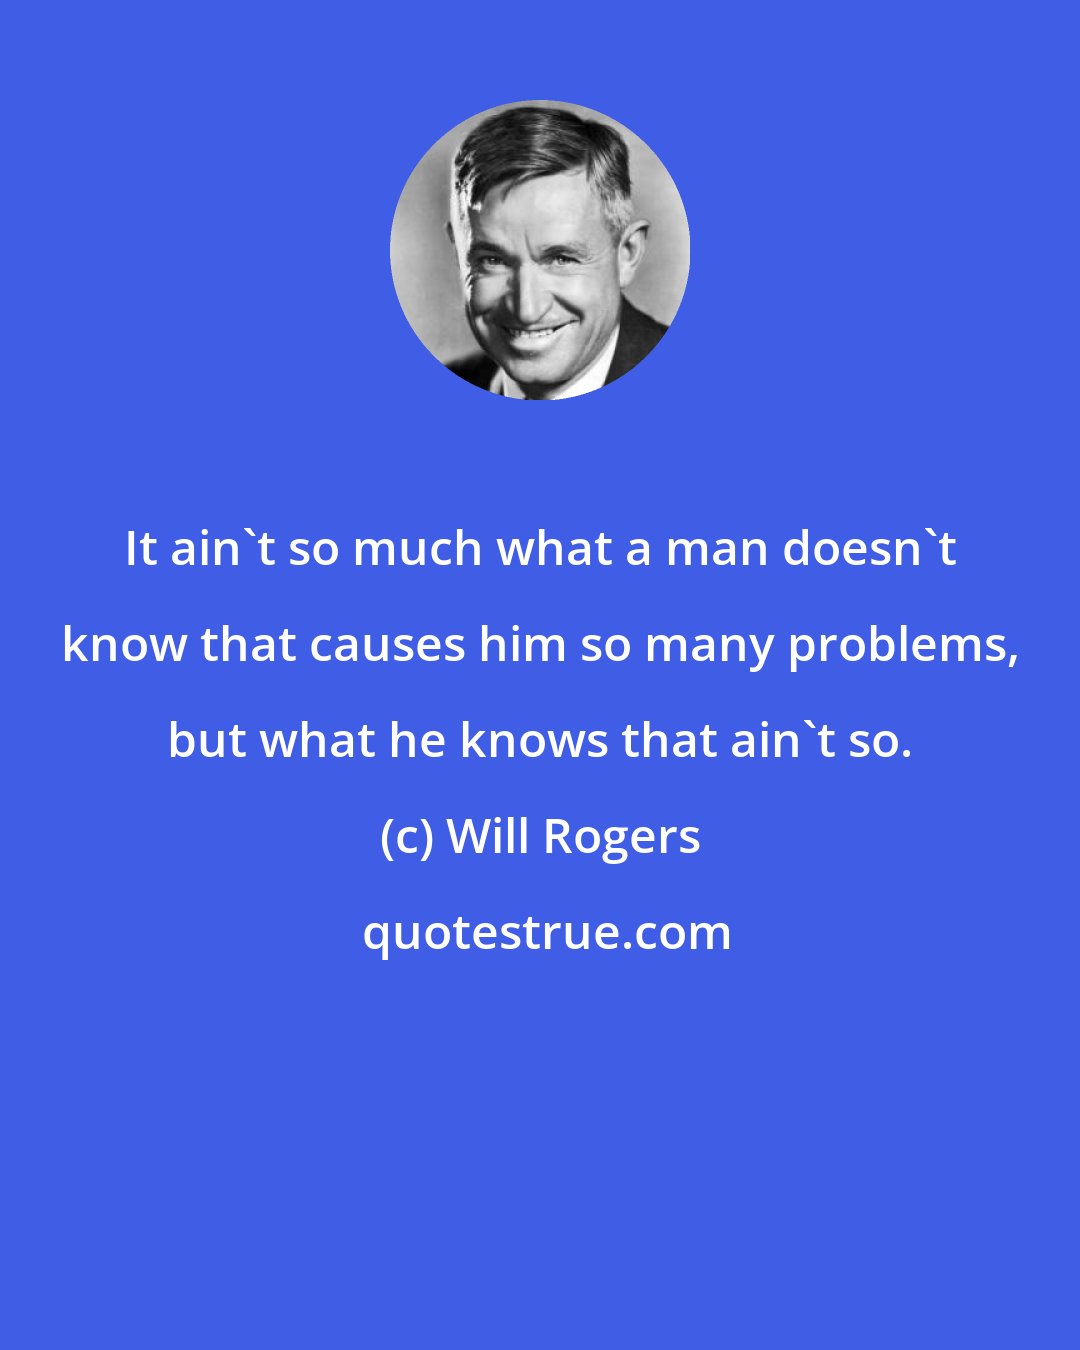 Will Rogers: It ain't so much what a man doesn't know that causes him so many problems, but what he knows that ain't so.